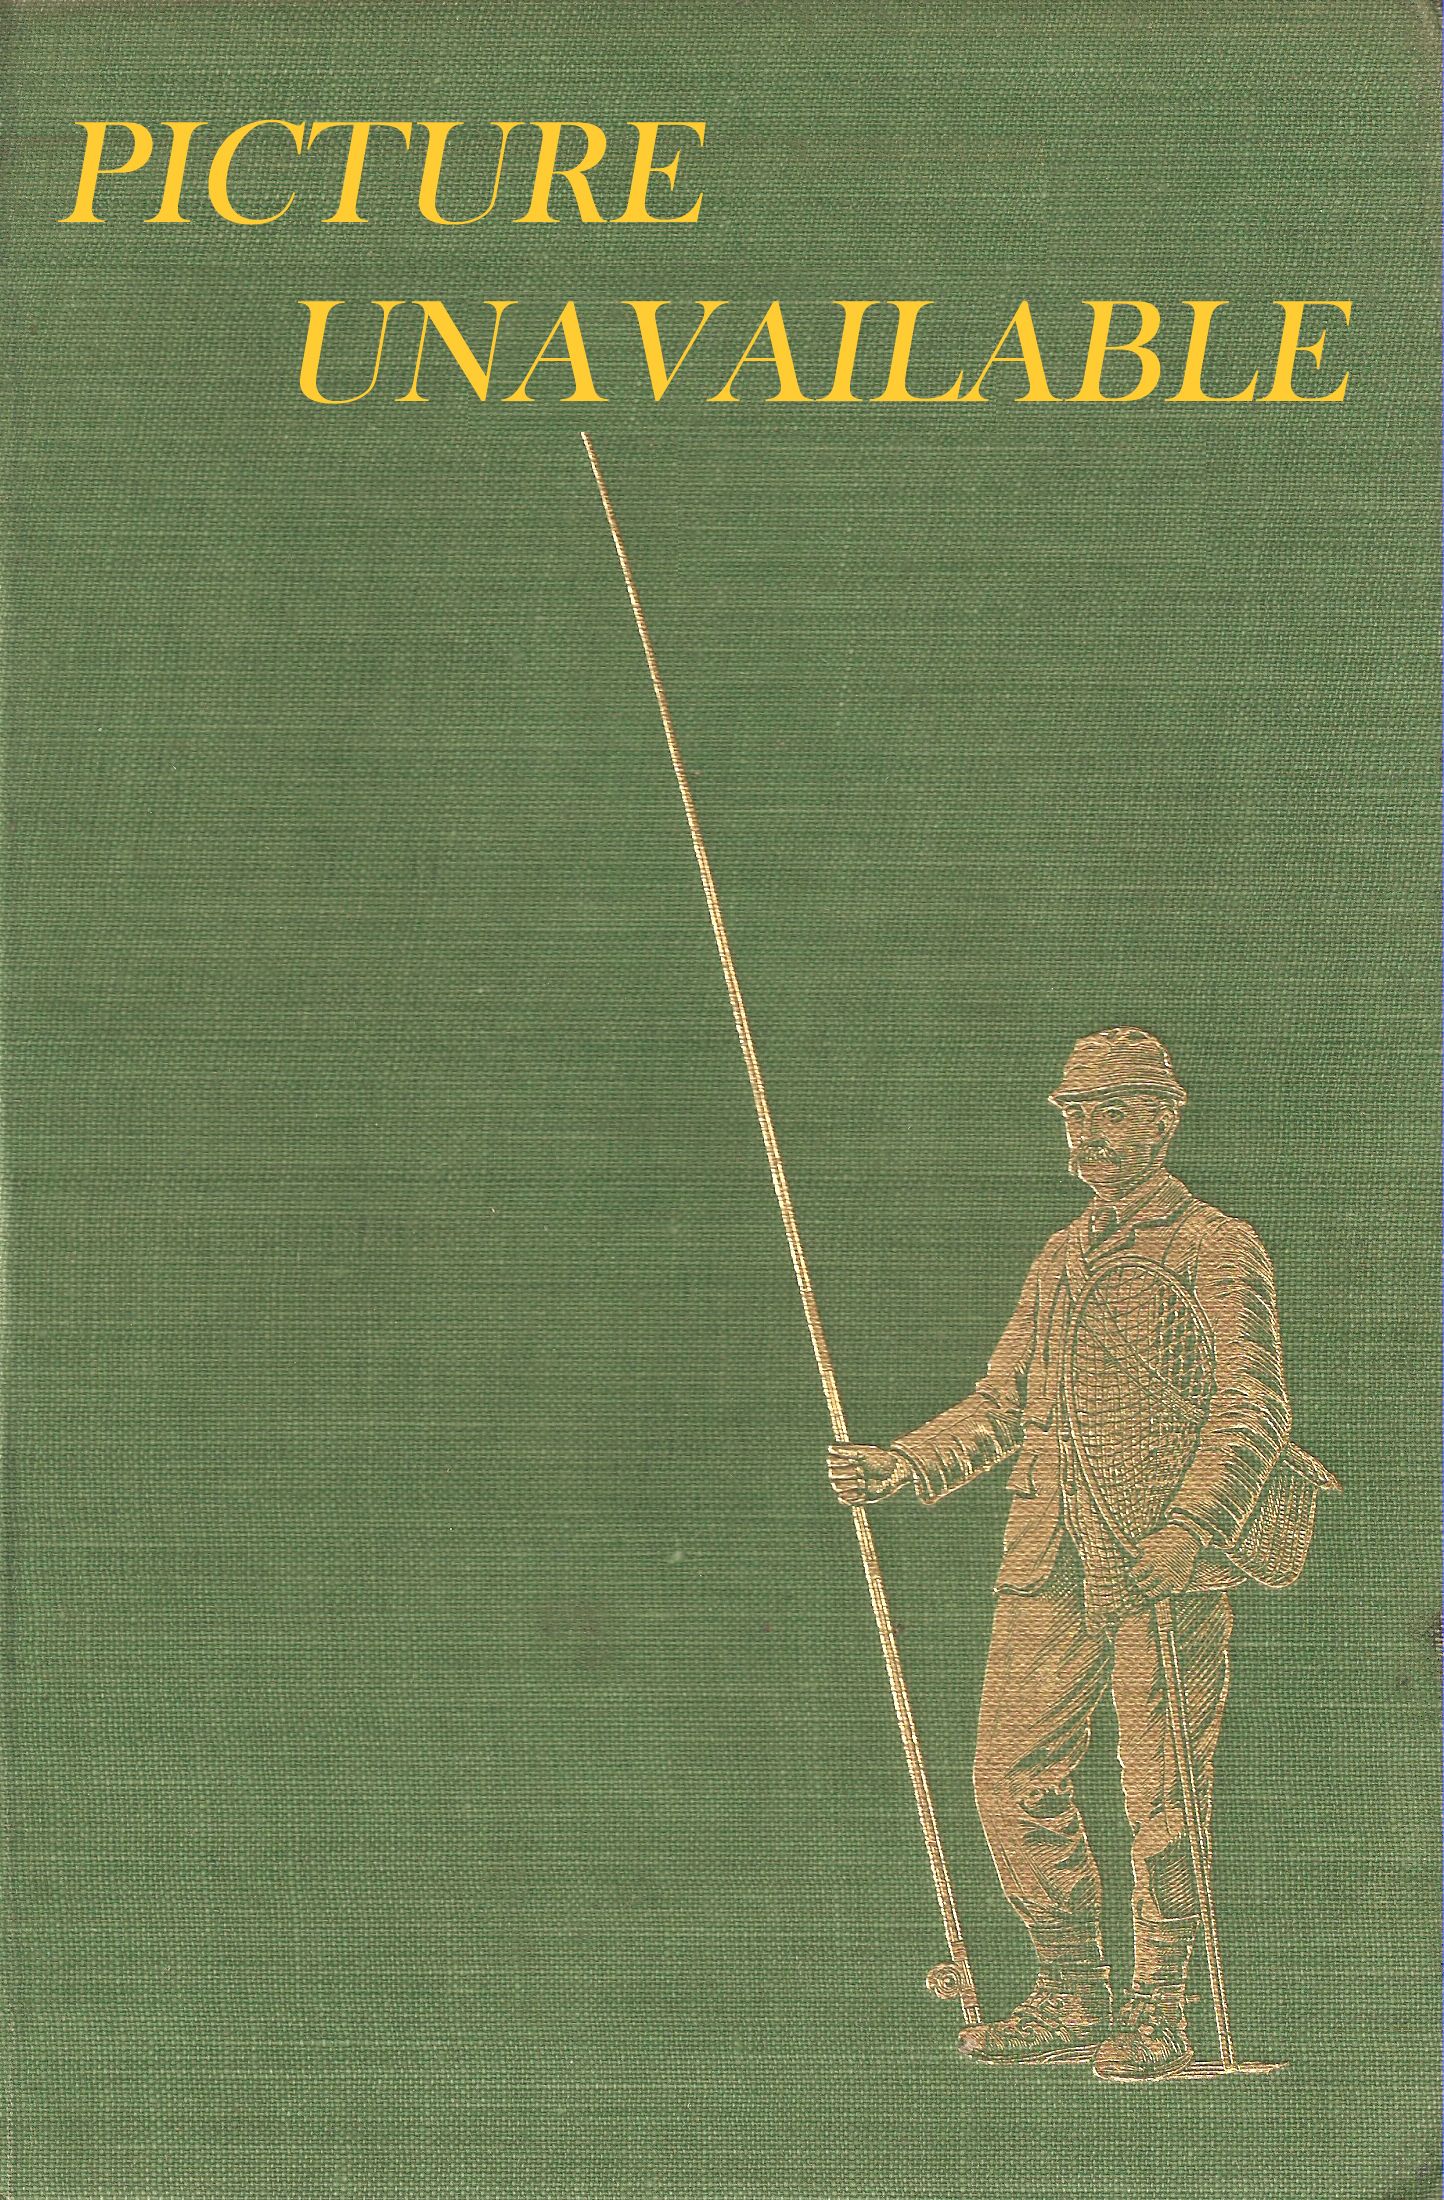 At passe Følg os det kan SALMON FISHING. The Lonsdale Library Volume X. By Eric Taverner, with  contributions by G.M.L. La Branche, Eric Parker, W.J.M. Menzies, J.A.  Rennie, A.H.E. Wood, Wyndham Forbes, Thomas Rook & Alban Bacon,  Barrister-at-Law. 